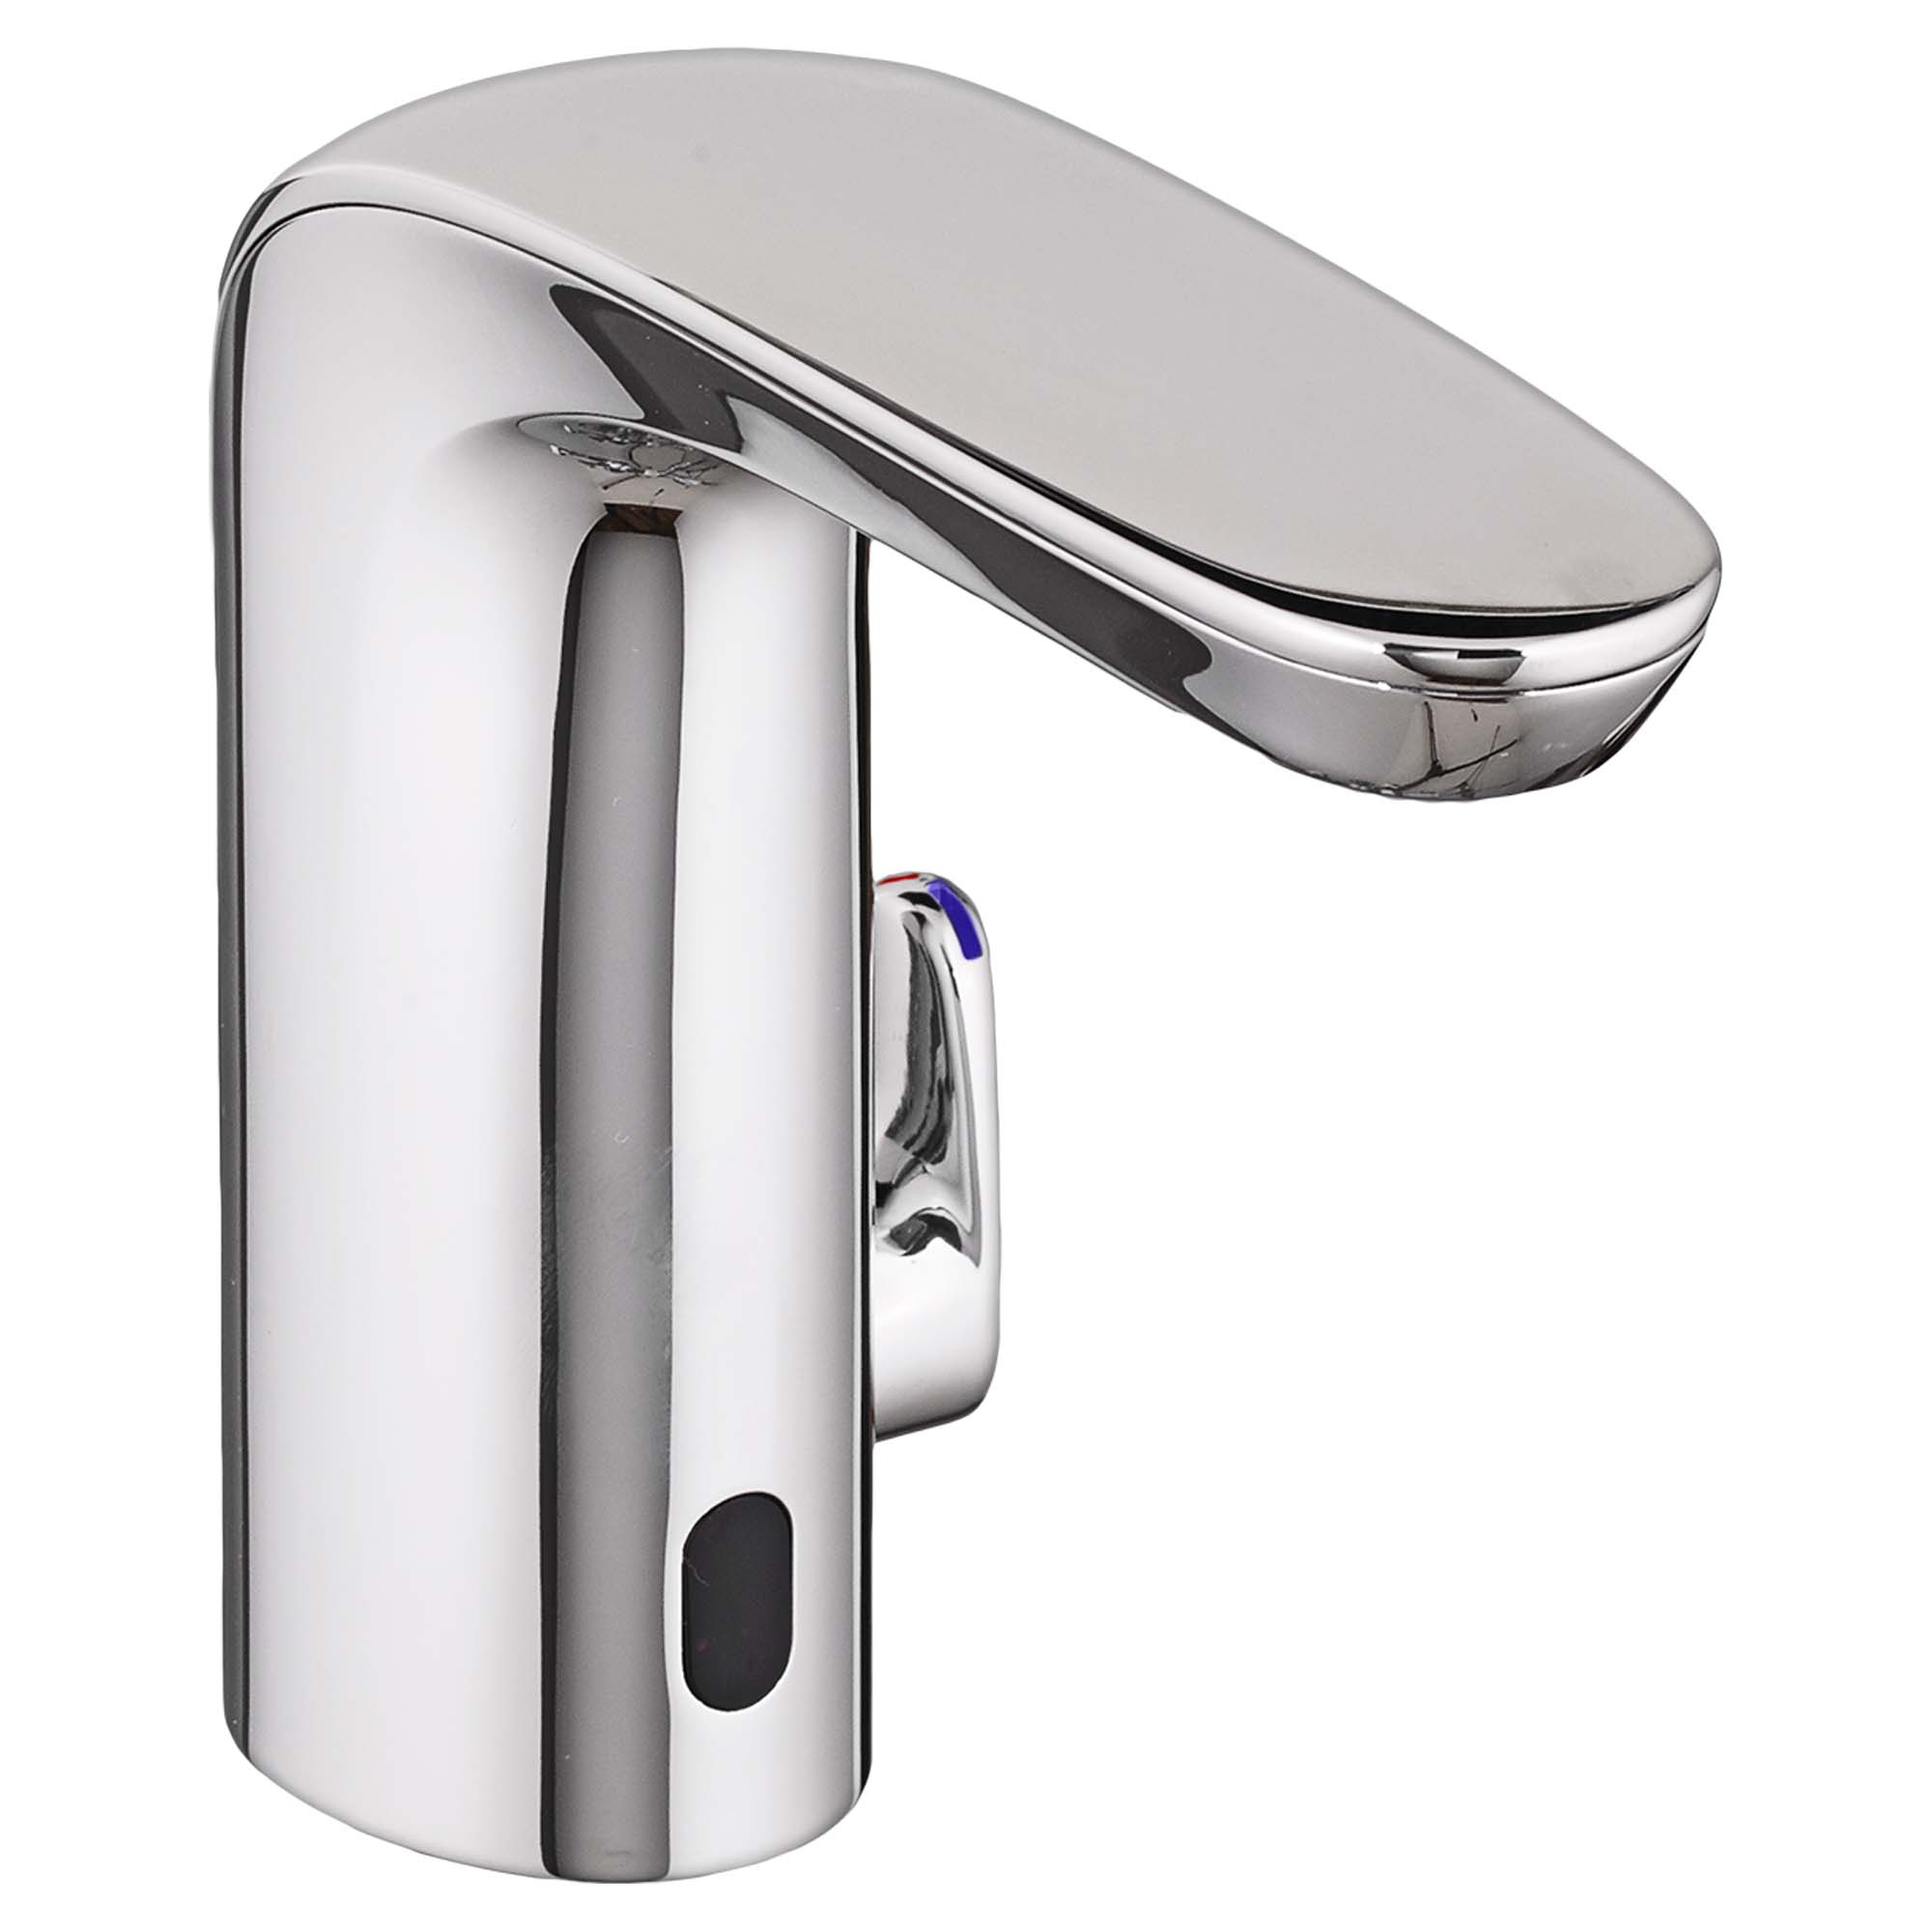 NextGen Selectronic® Touchless Faucet, Battery-Powered With Above-Deck Mixing, 0.5 gpm/1.9 Lpm